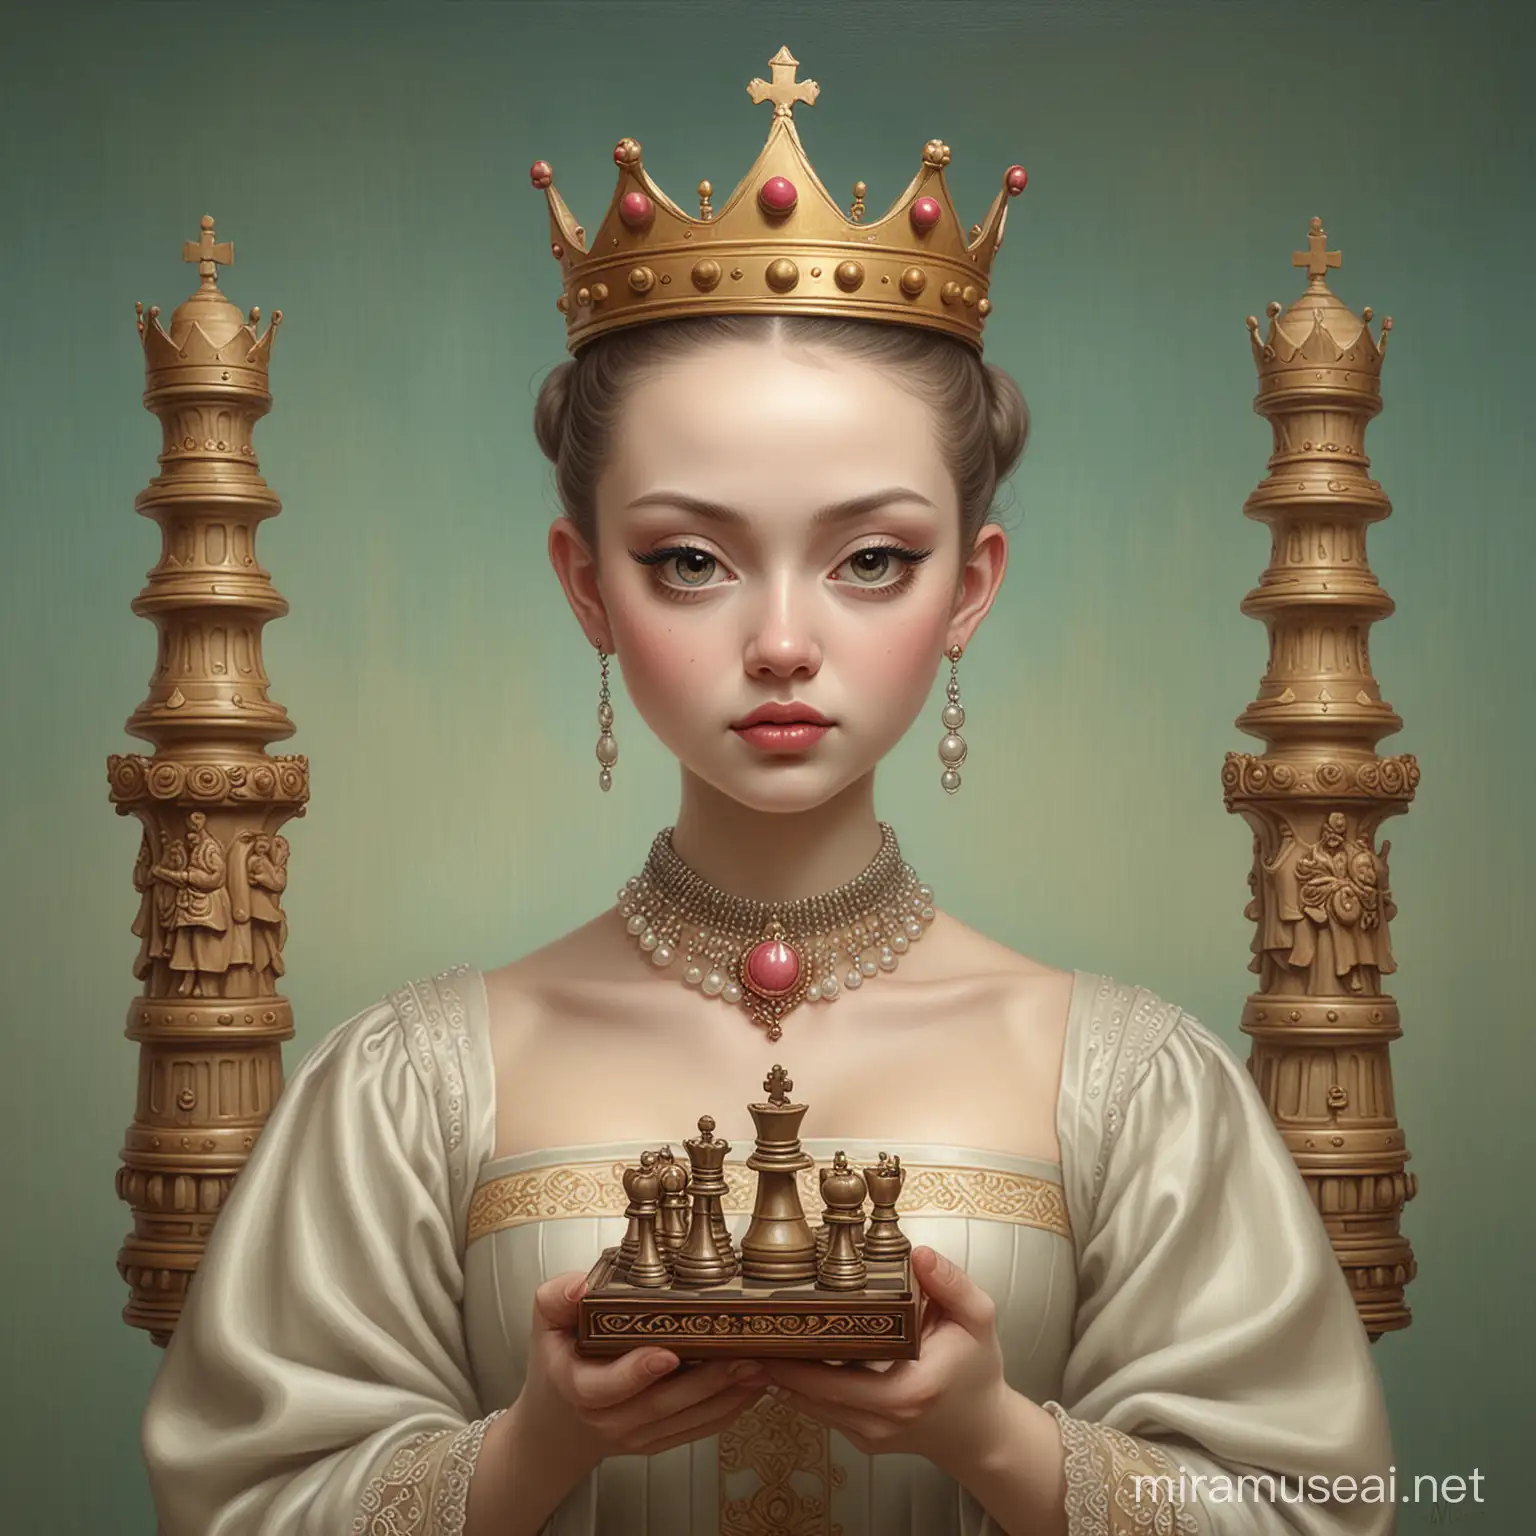 a painting of a woman, with crown, holding chess piece, mark ryden highly detailed, style of mark ryden, mark ryden style, yoshitomo nara, mark ryden in the style of, inspired by Mark Ryden, japanese pop surrealism, by Mark Ryden, japanese popsurrealism, jana brike art, by Jason Teraoka, lowbrow pop surrealism